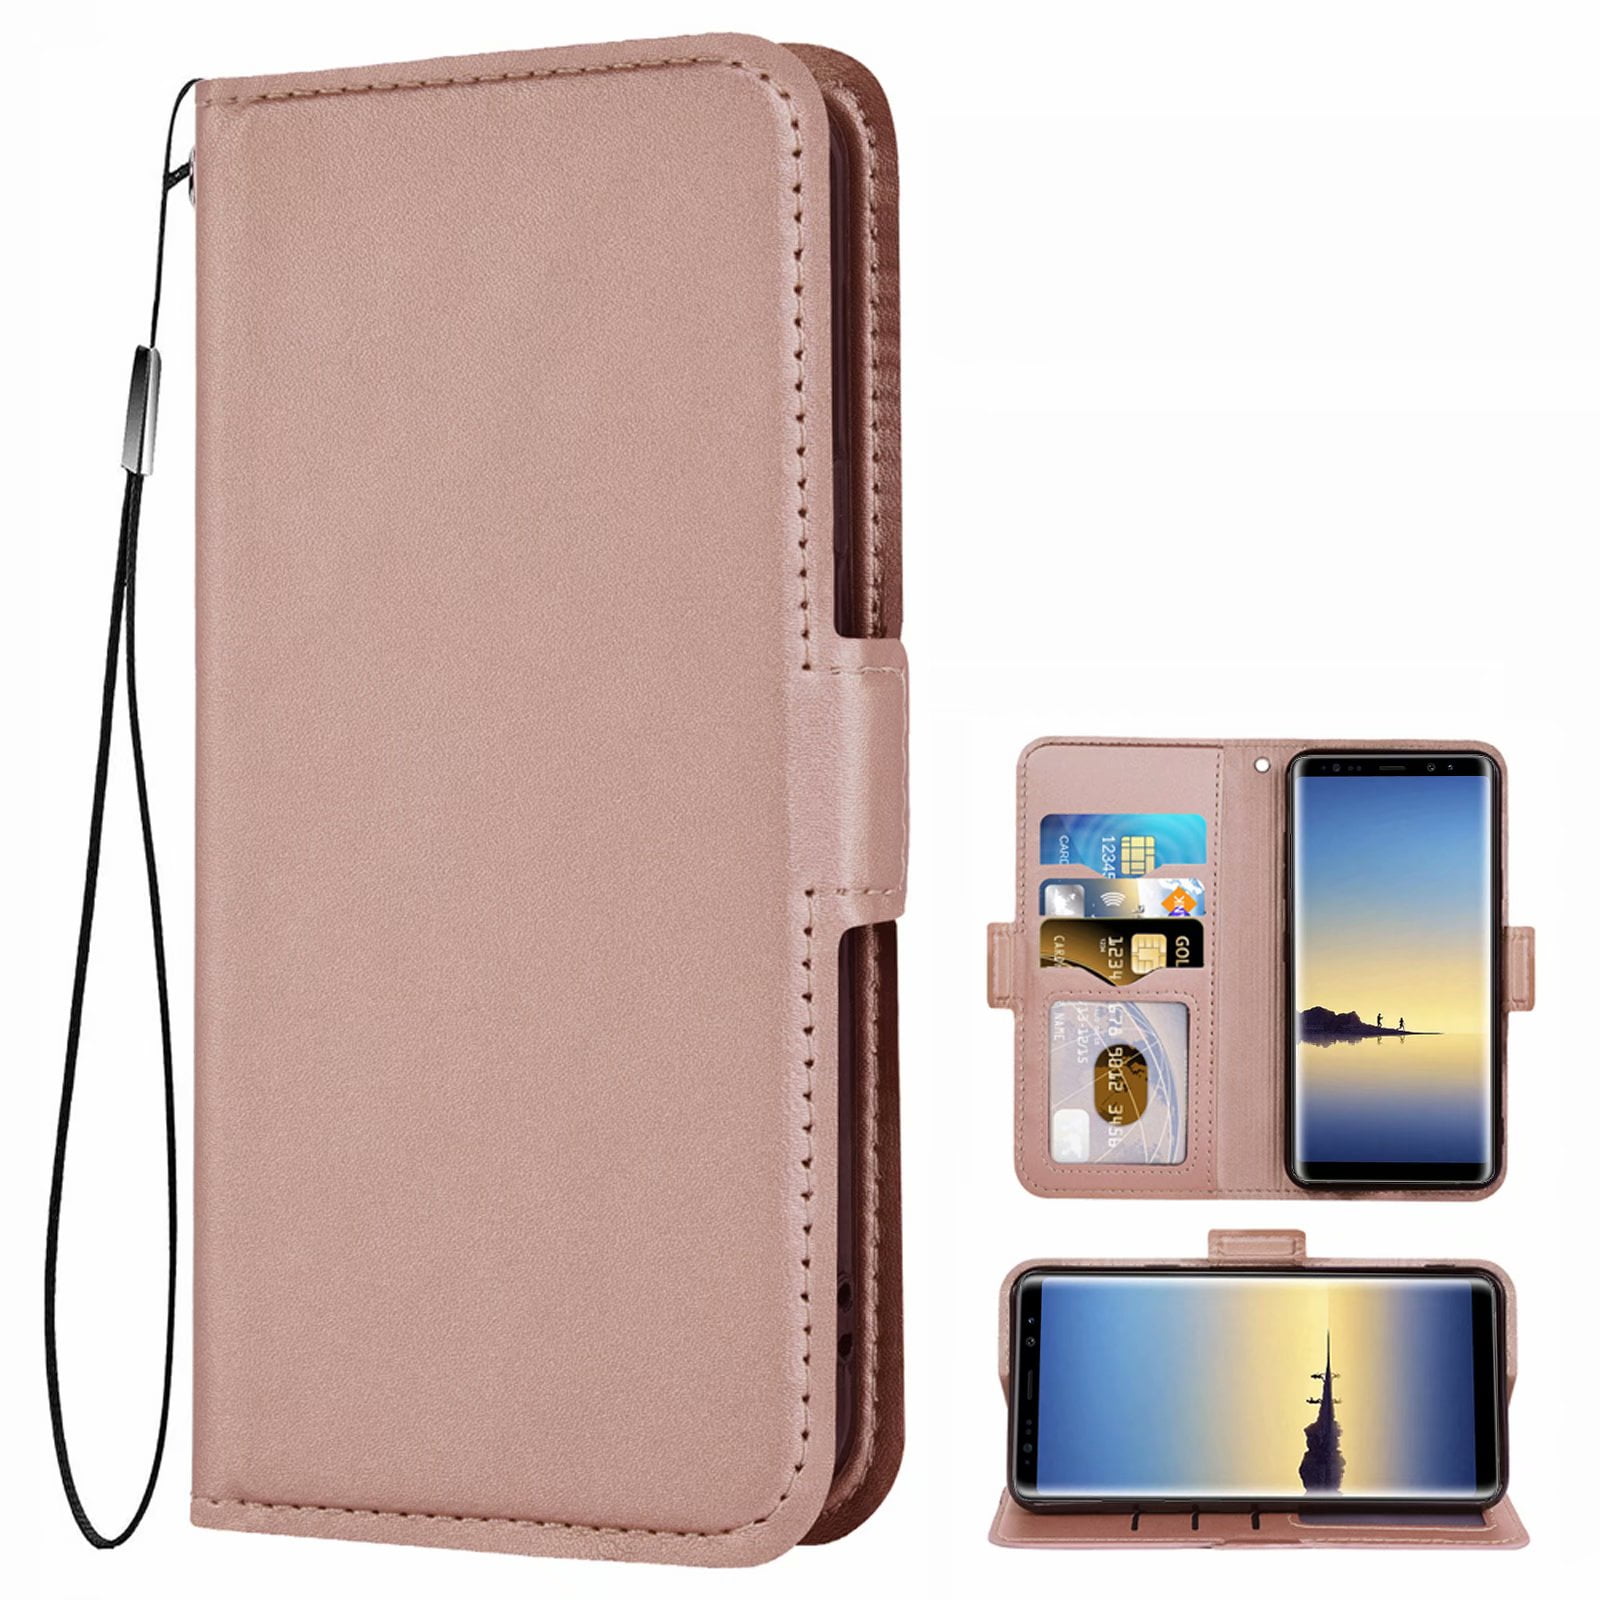 Leather Case for Samsung Galaxy Note8 Flip Cover fit for Samsung Galaxy Note8 Business Gifts with Waterproof-case Bags 